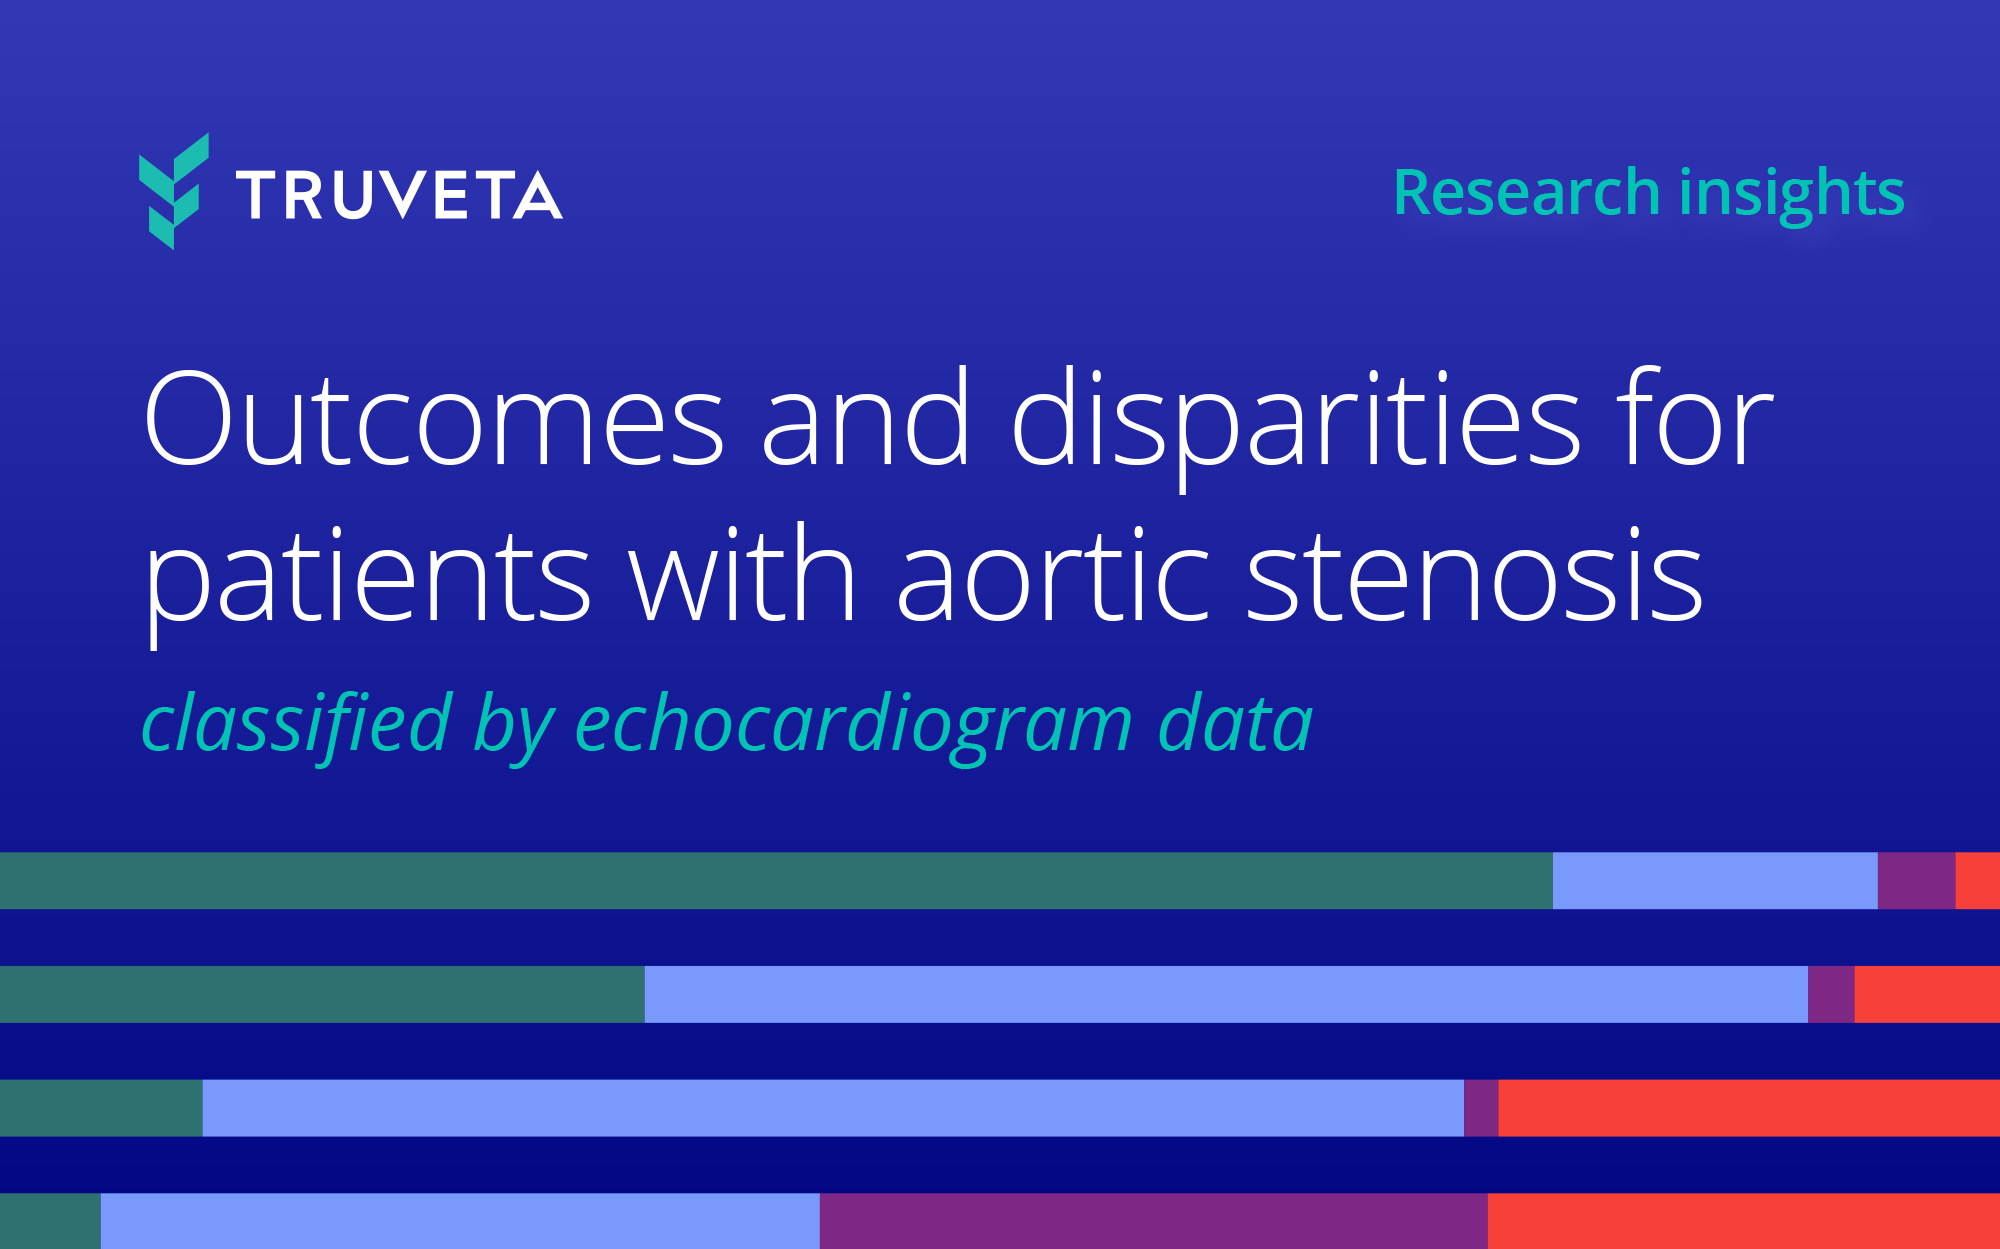 Echocardiogram and EHR data enables researchers to study patient outcomes and potential disparities among those with aortic stenosis